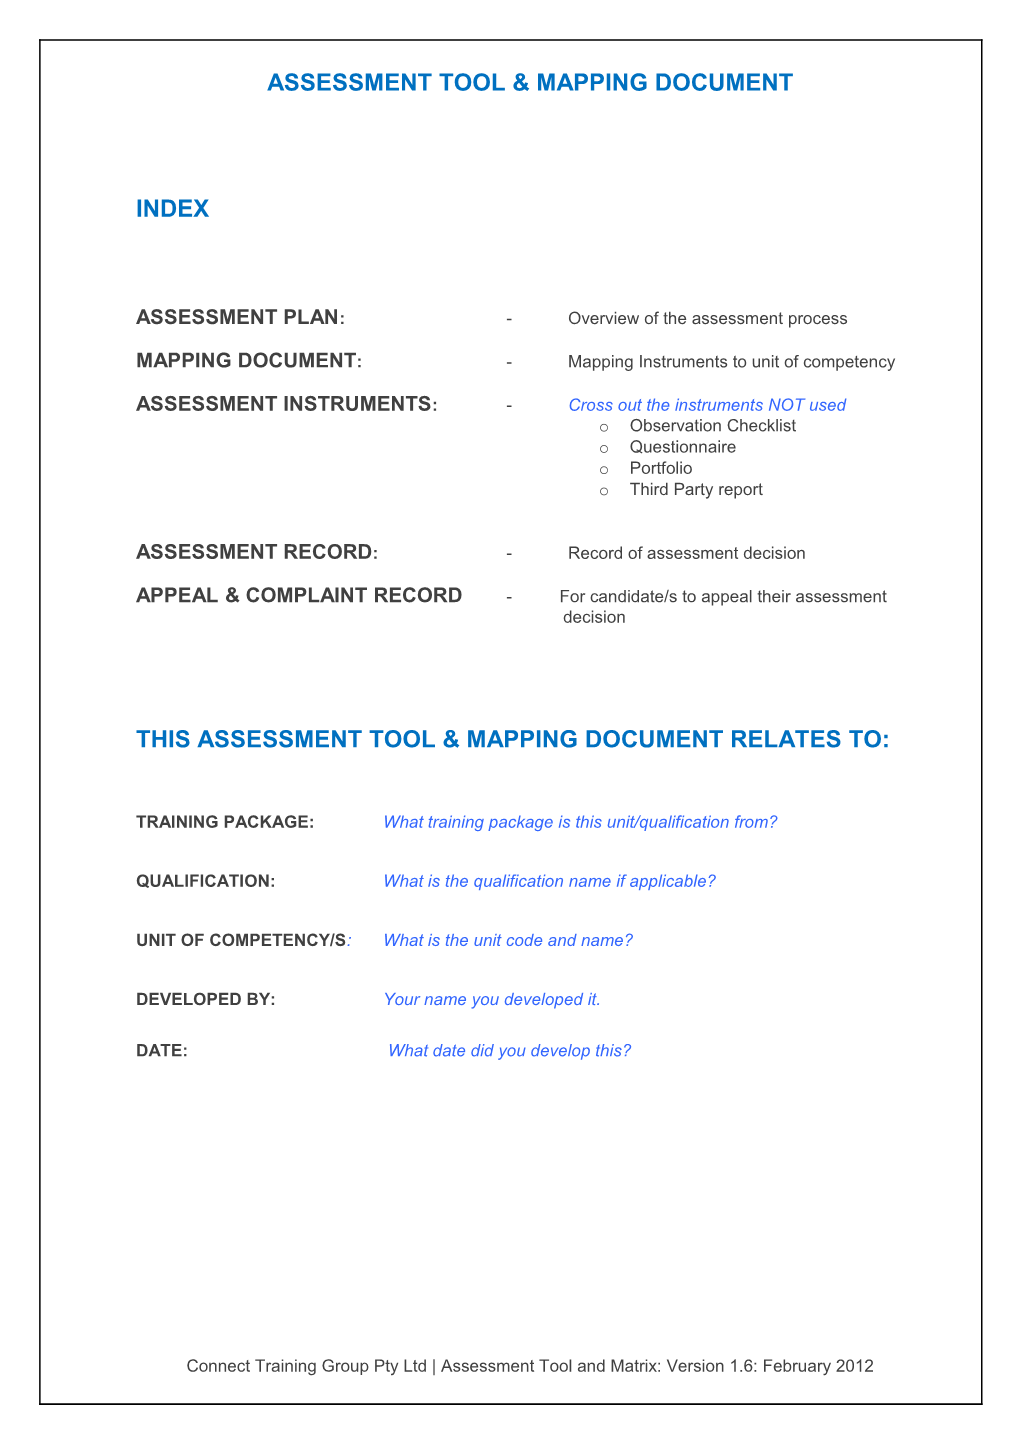 Assessment Tool & Mapping Document